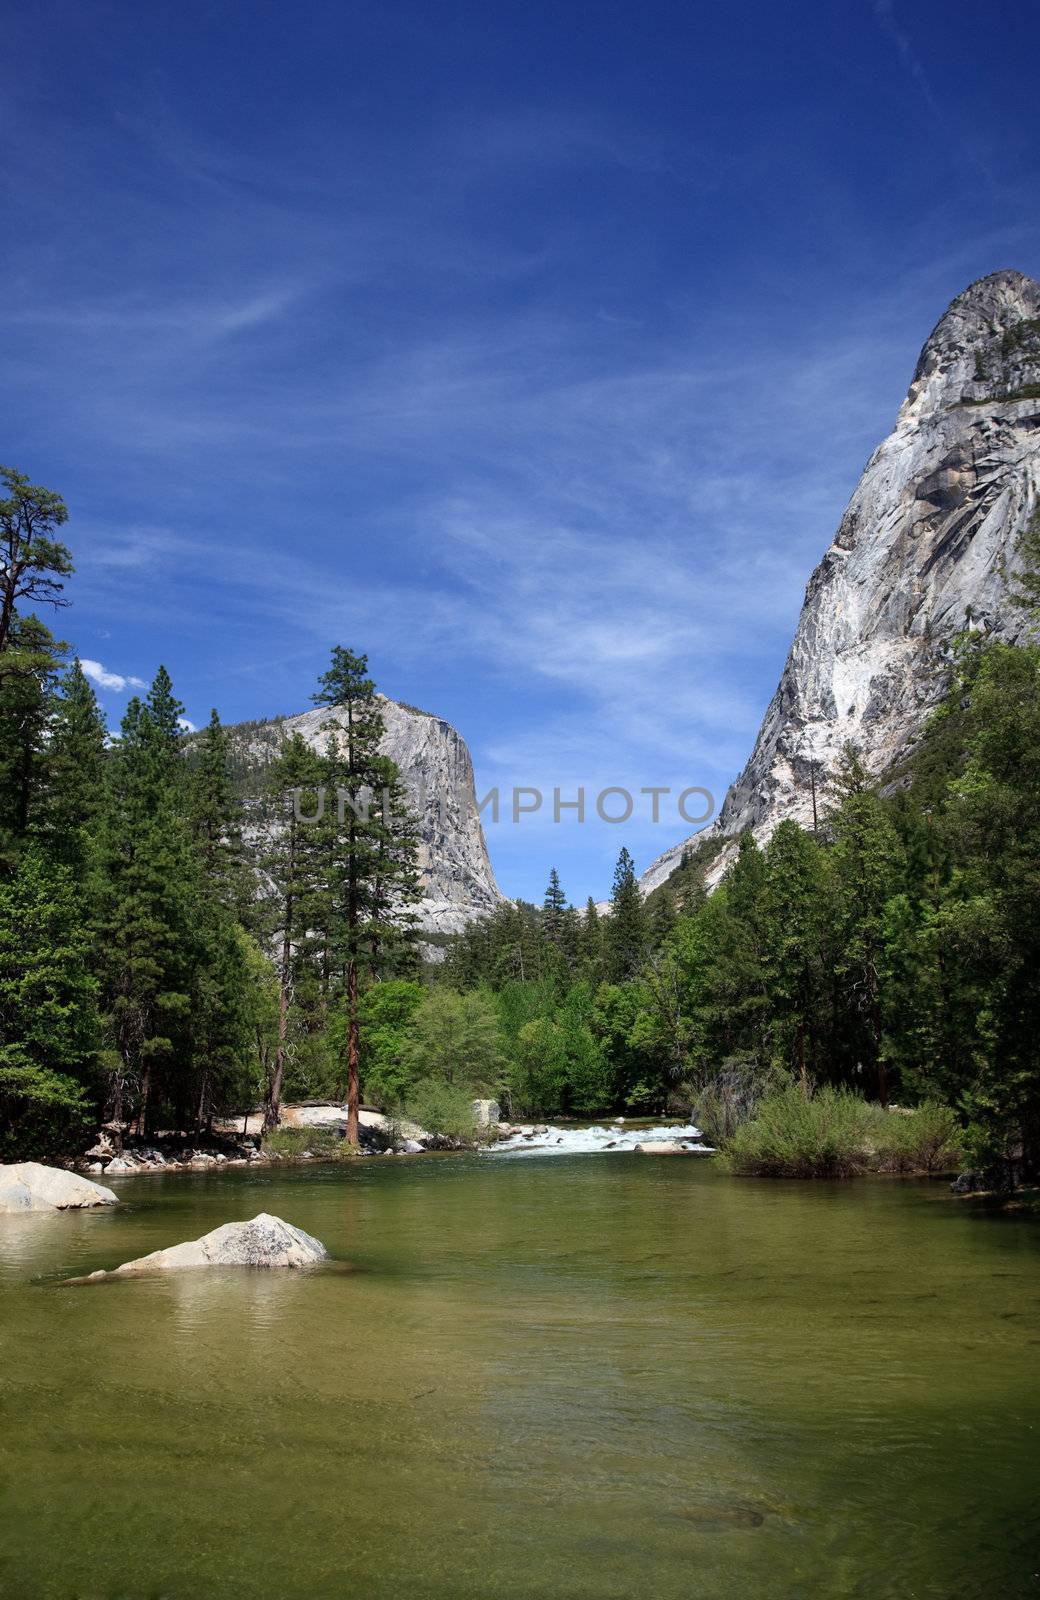 View of Yosemite valley reflected in Mirror Lake by steheap